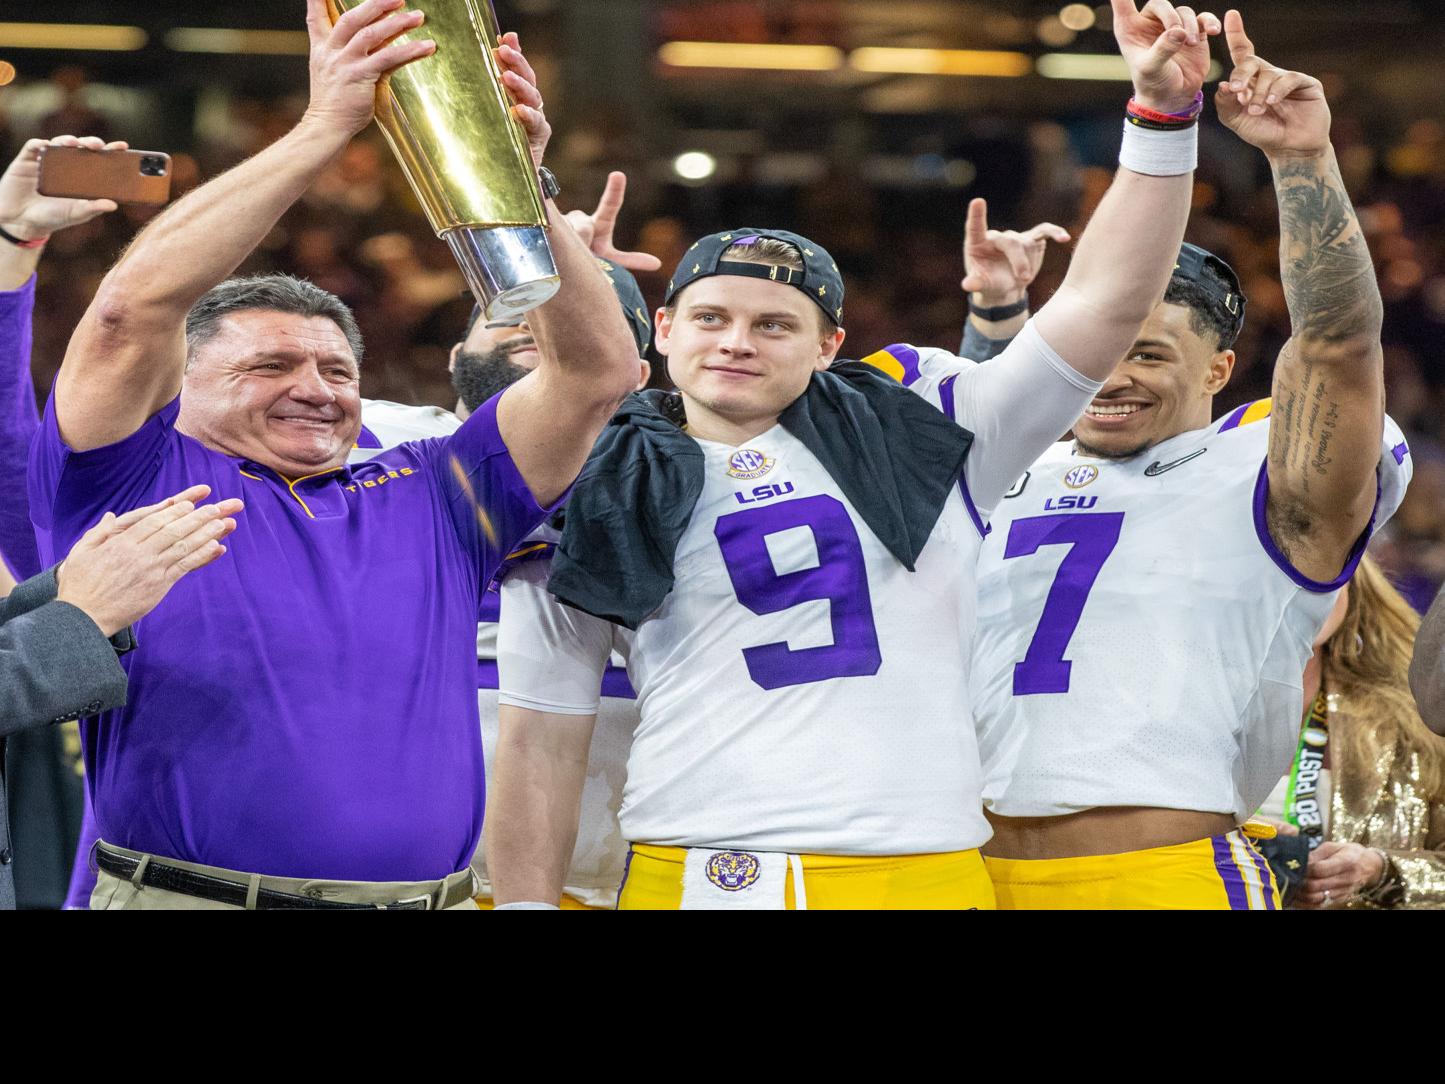 LSU National Championship Celebration to be Held This Wednesday